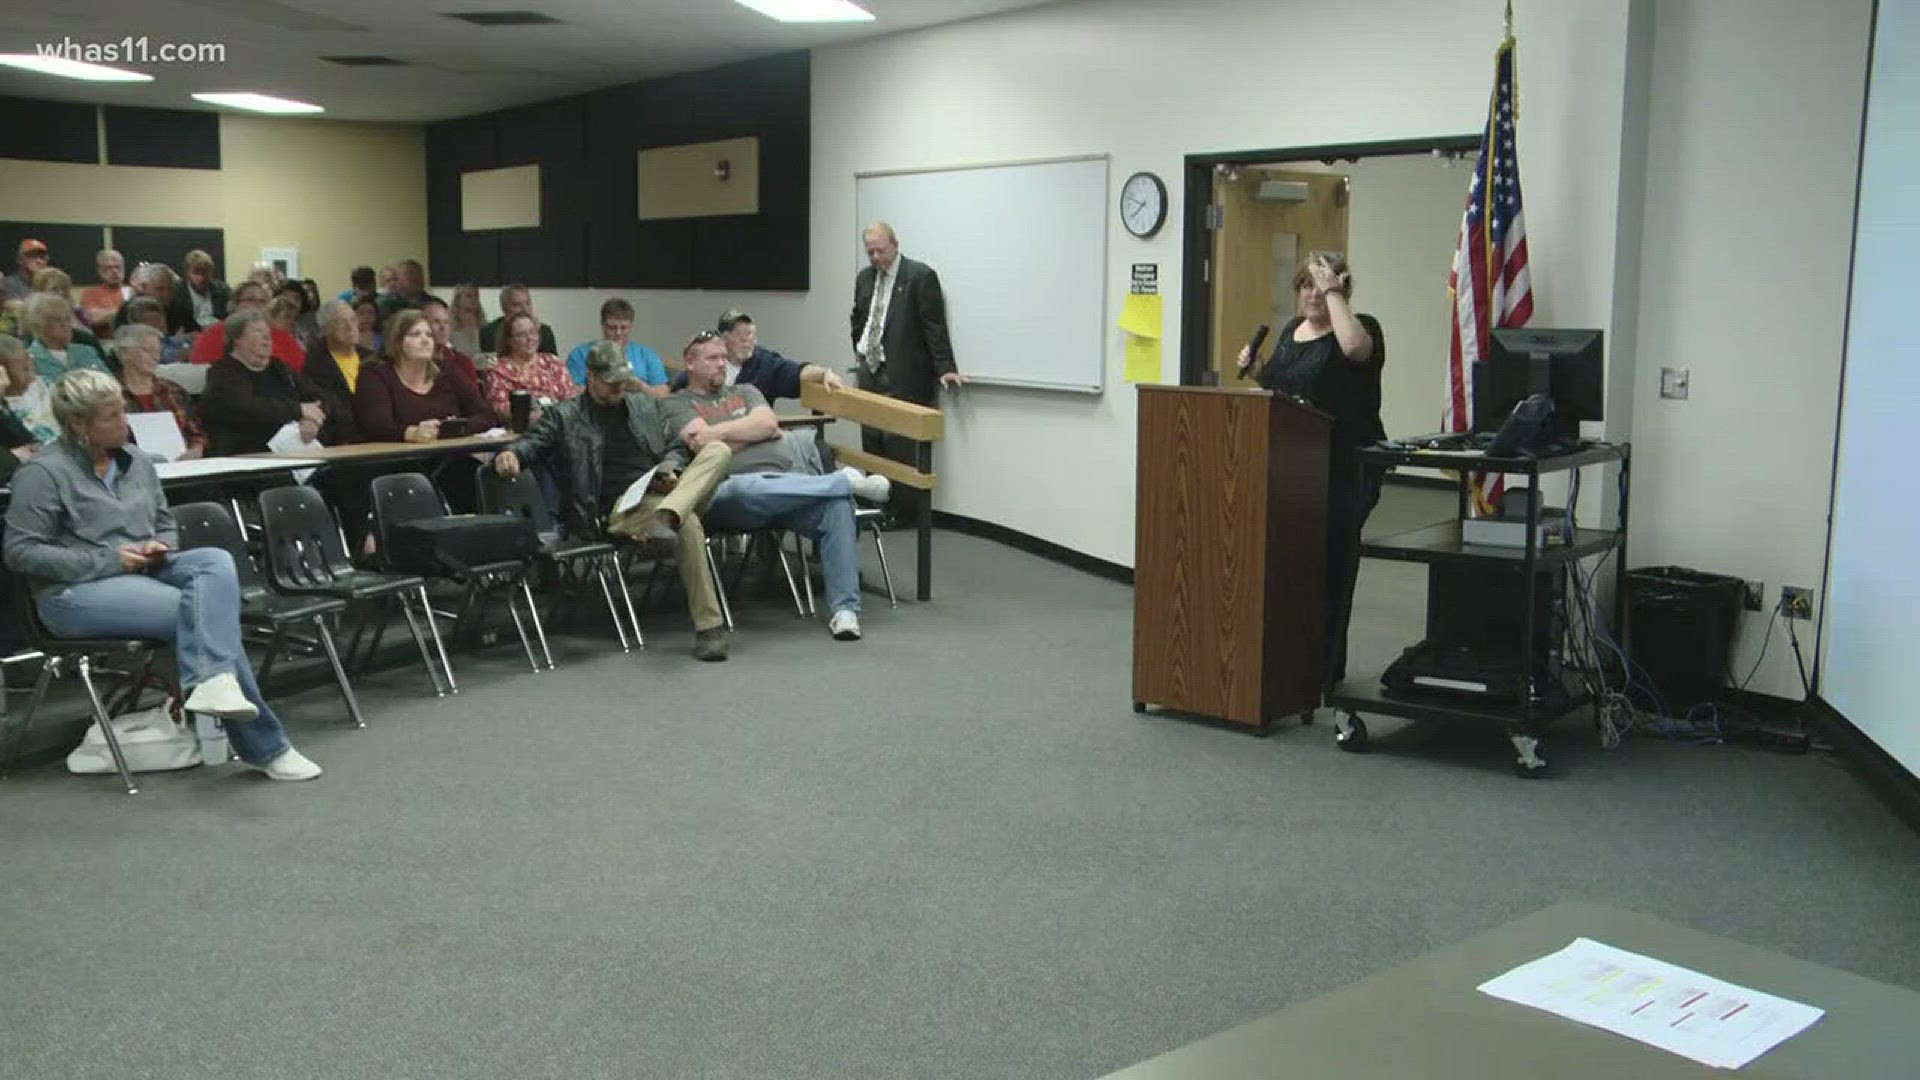 Controversy over S. Ind. school renovation proposal